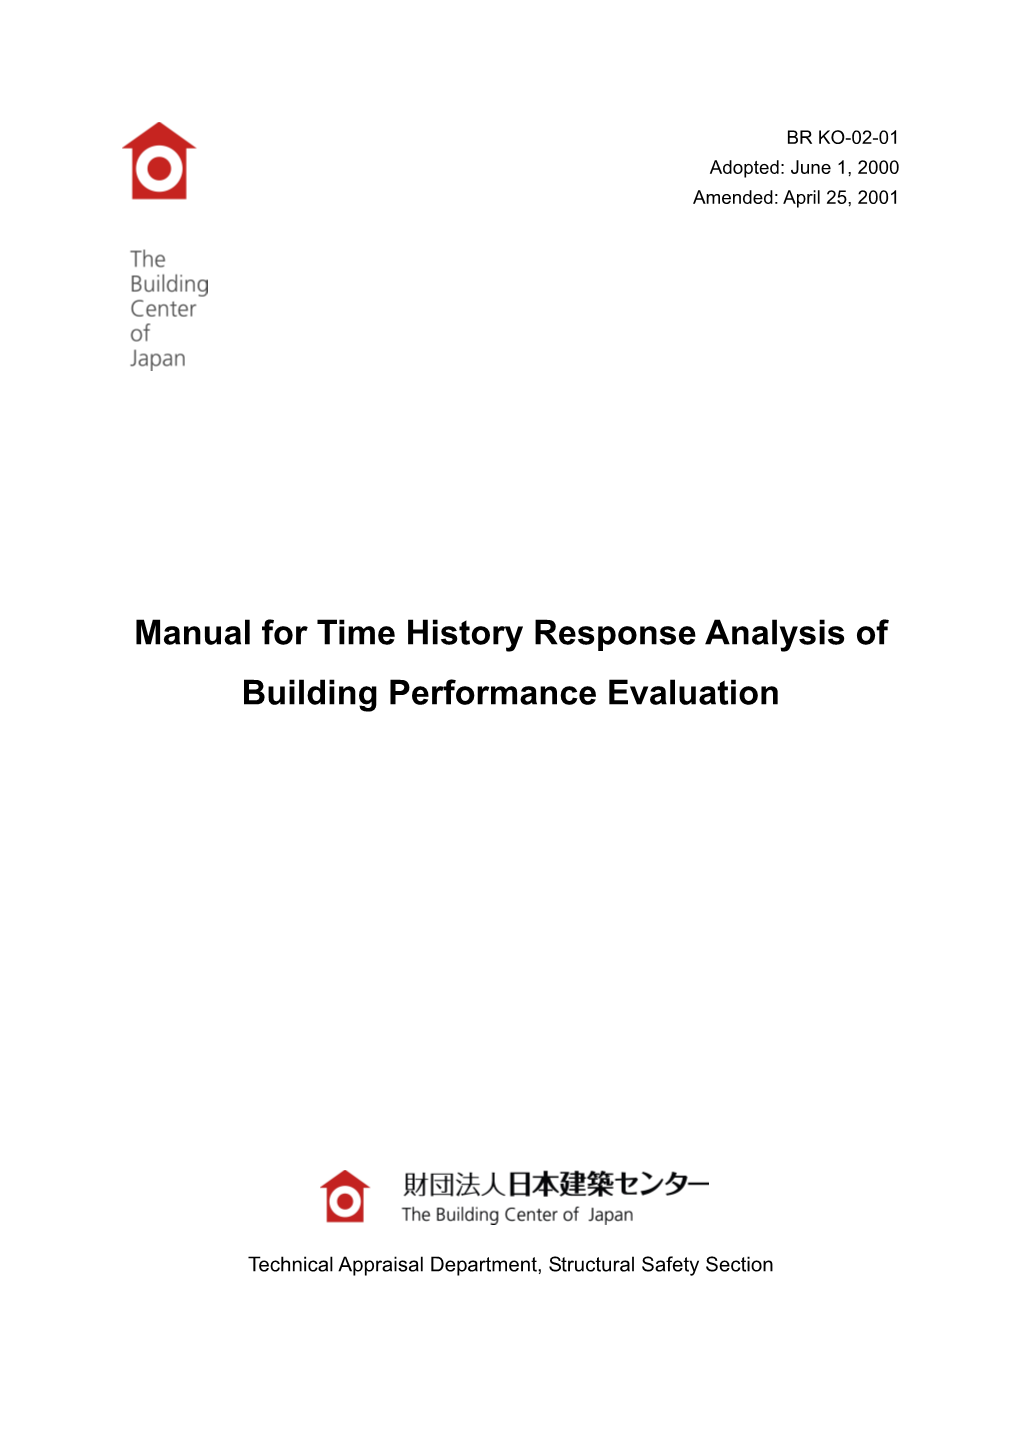 Manual for Time History Response Analysis of Building Performance Evaluation